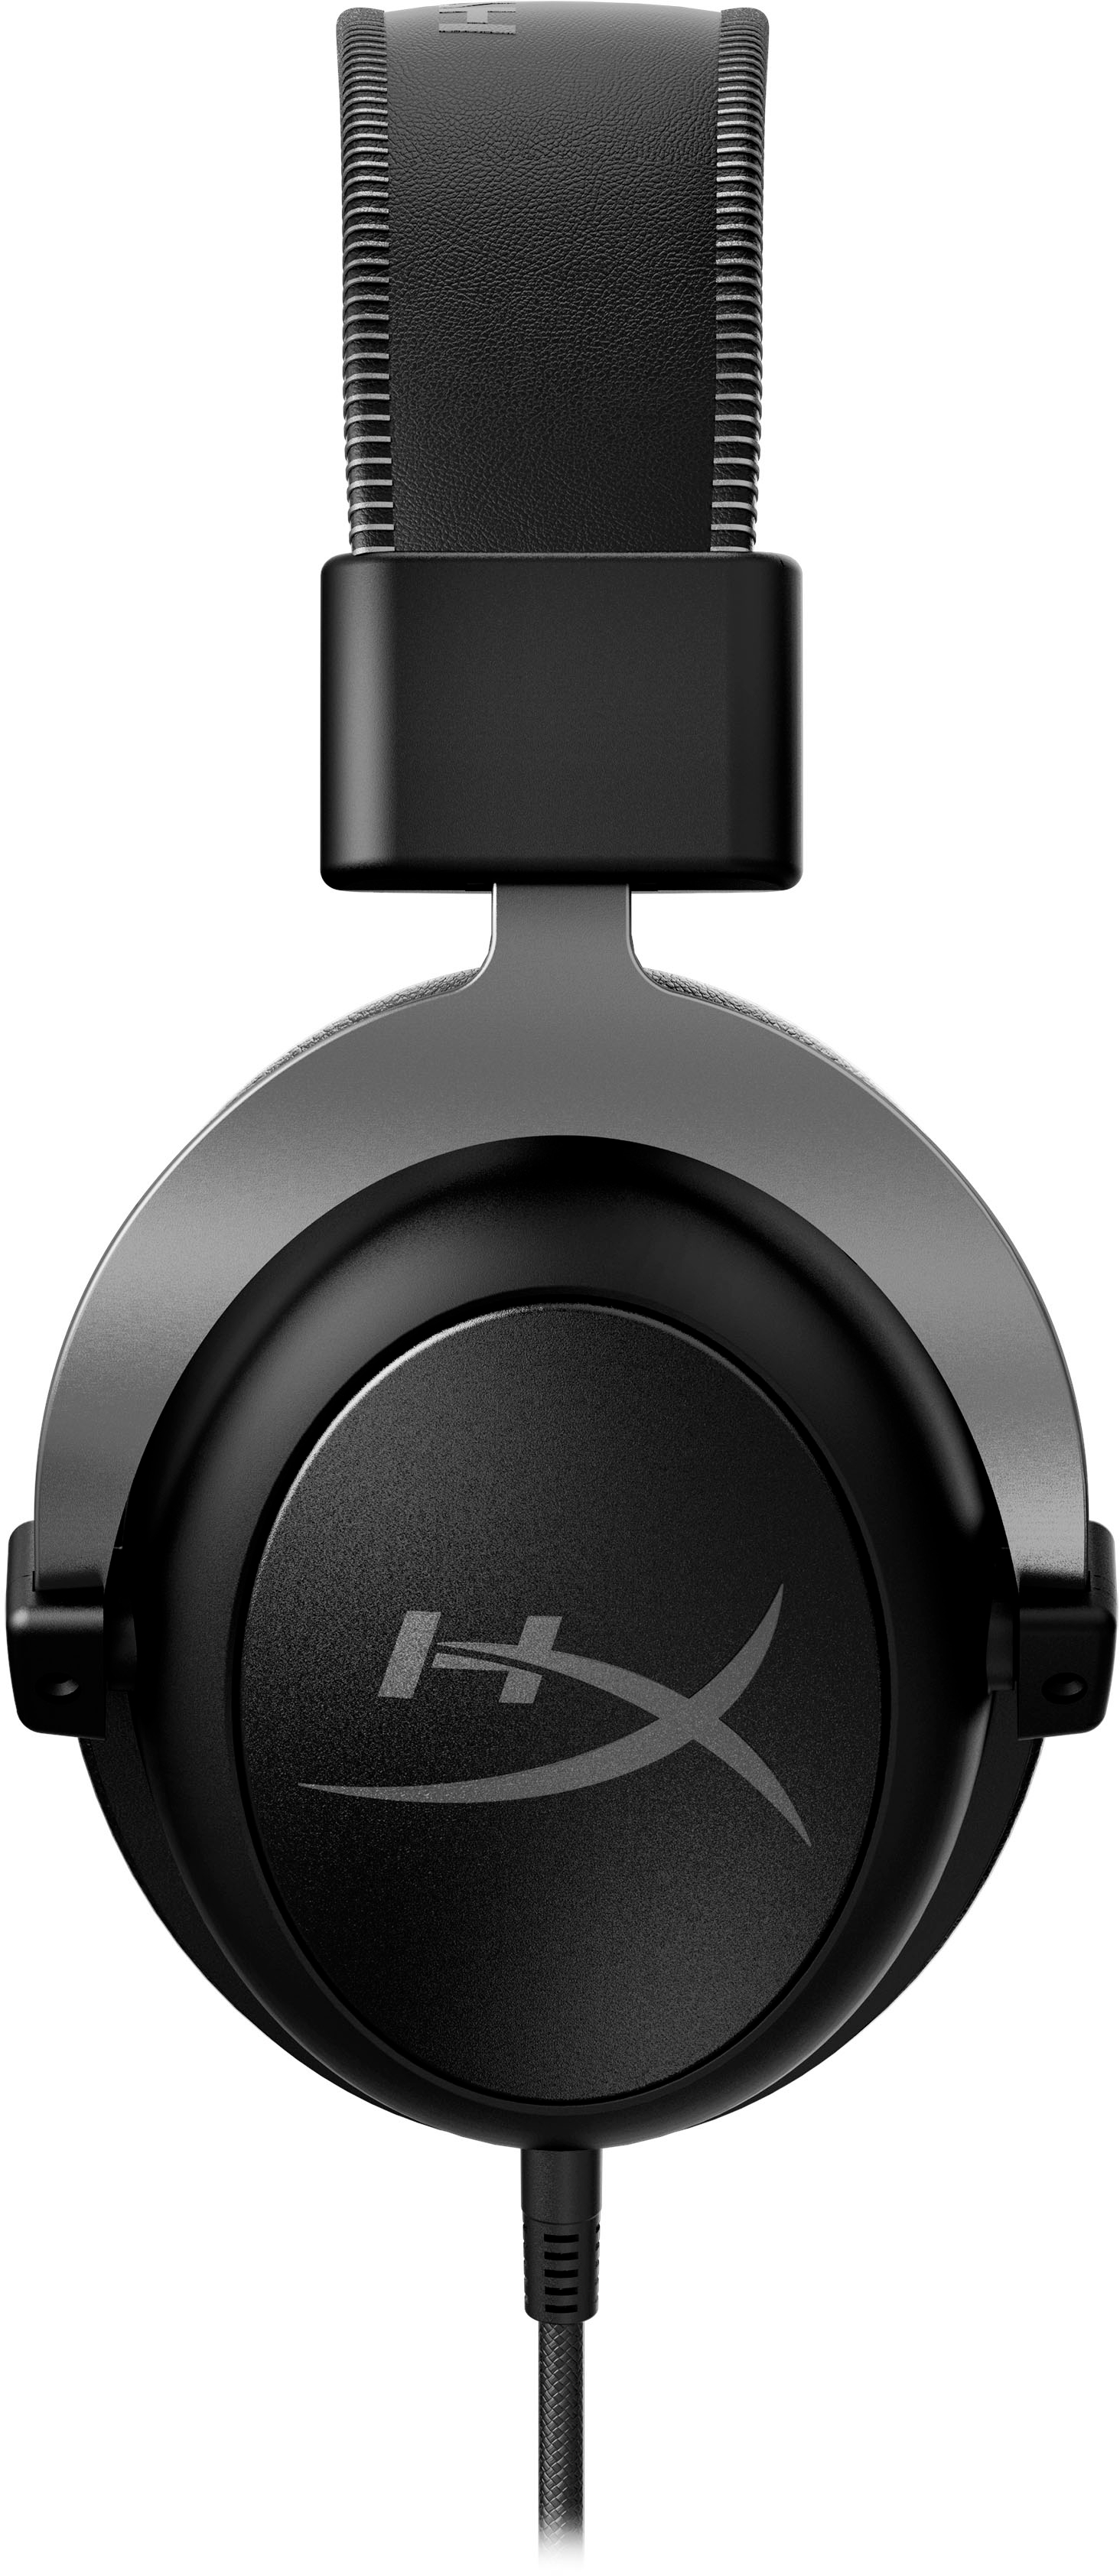 HyperX Cloud III Wired Gaming Headset for PC, PS5, PS4, Xbox